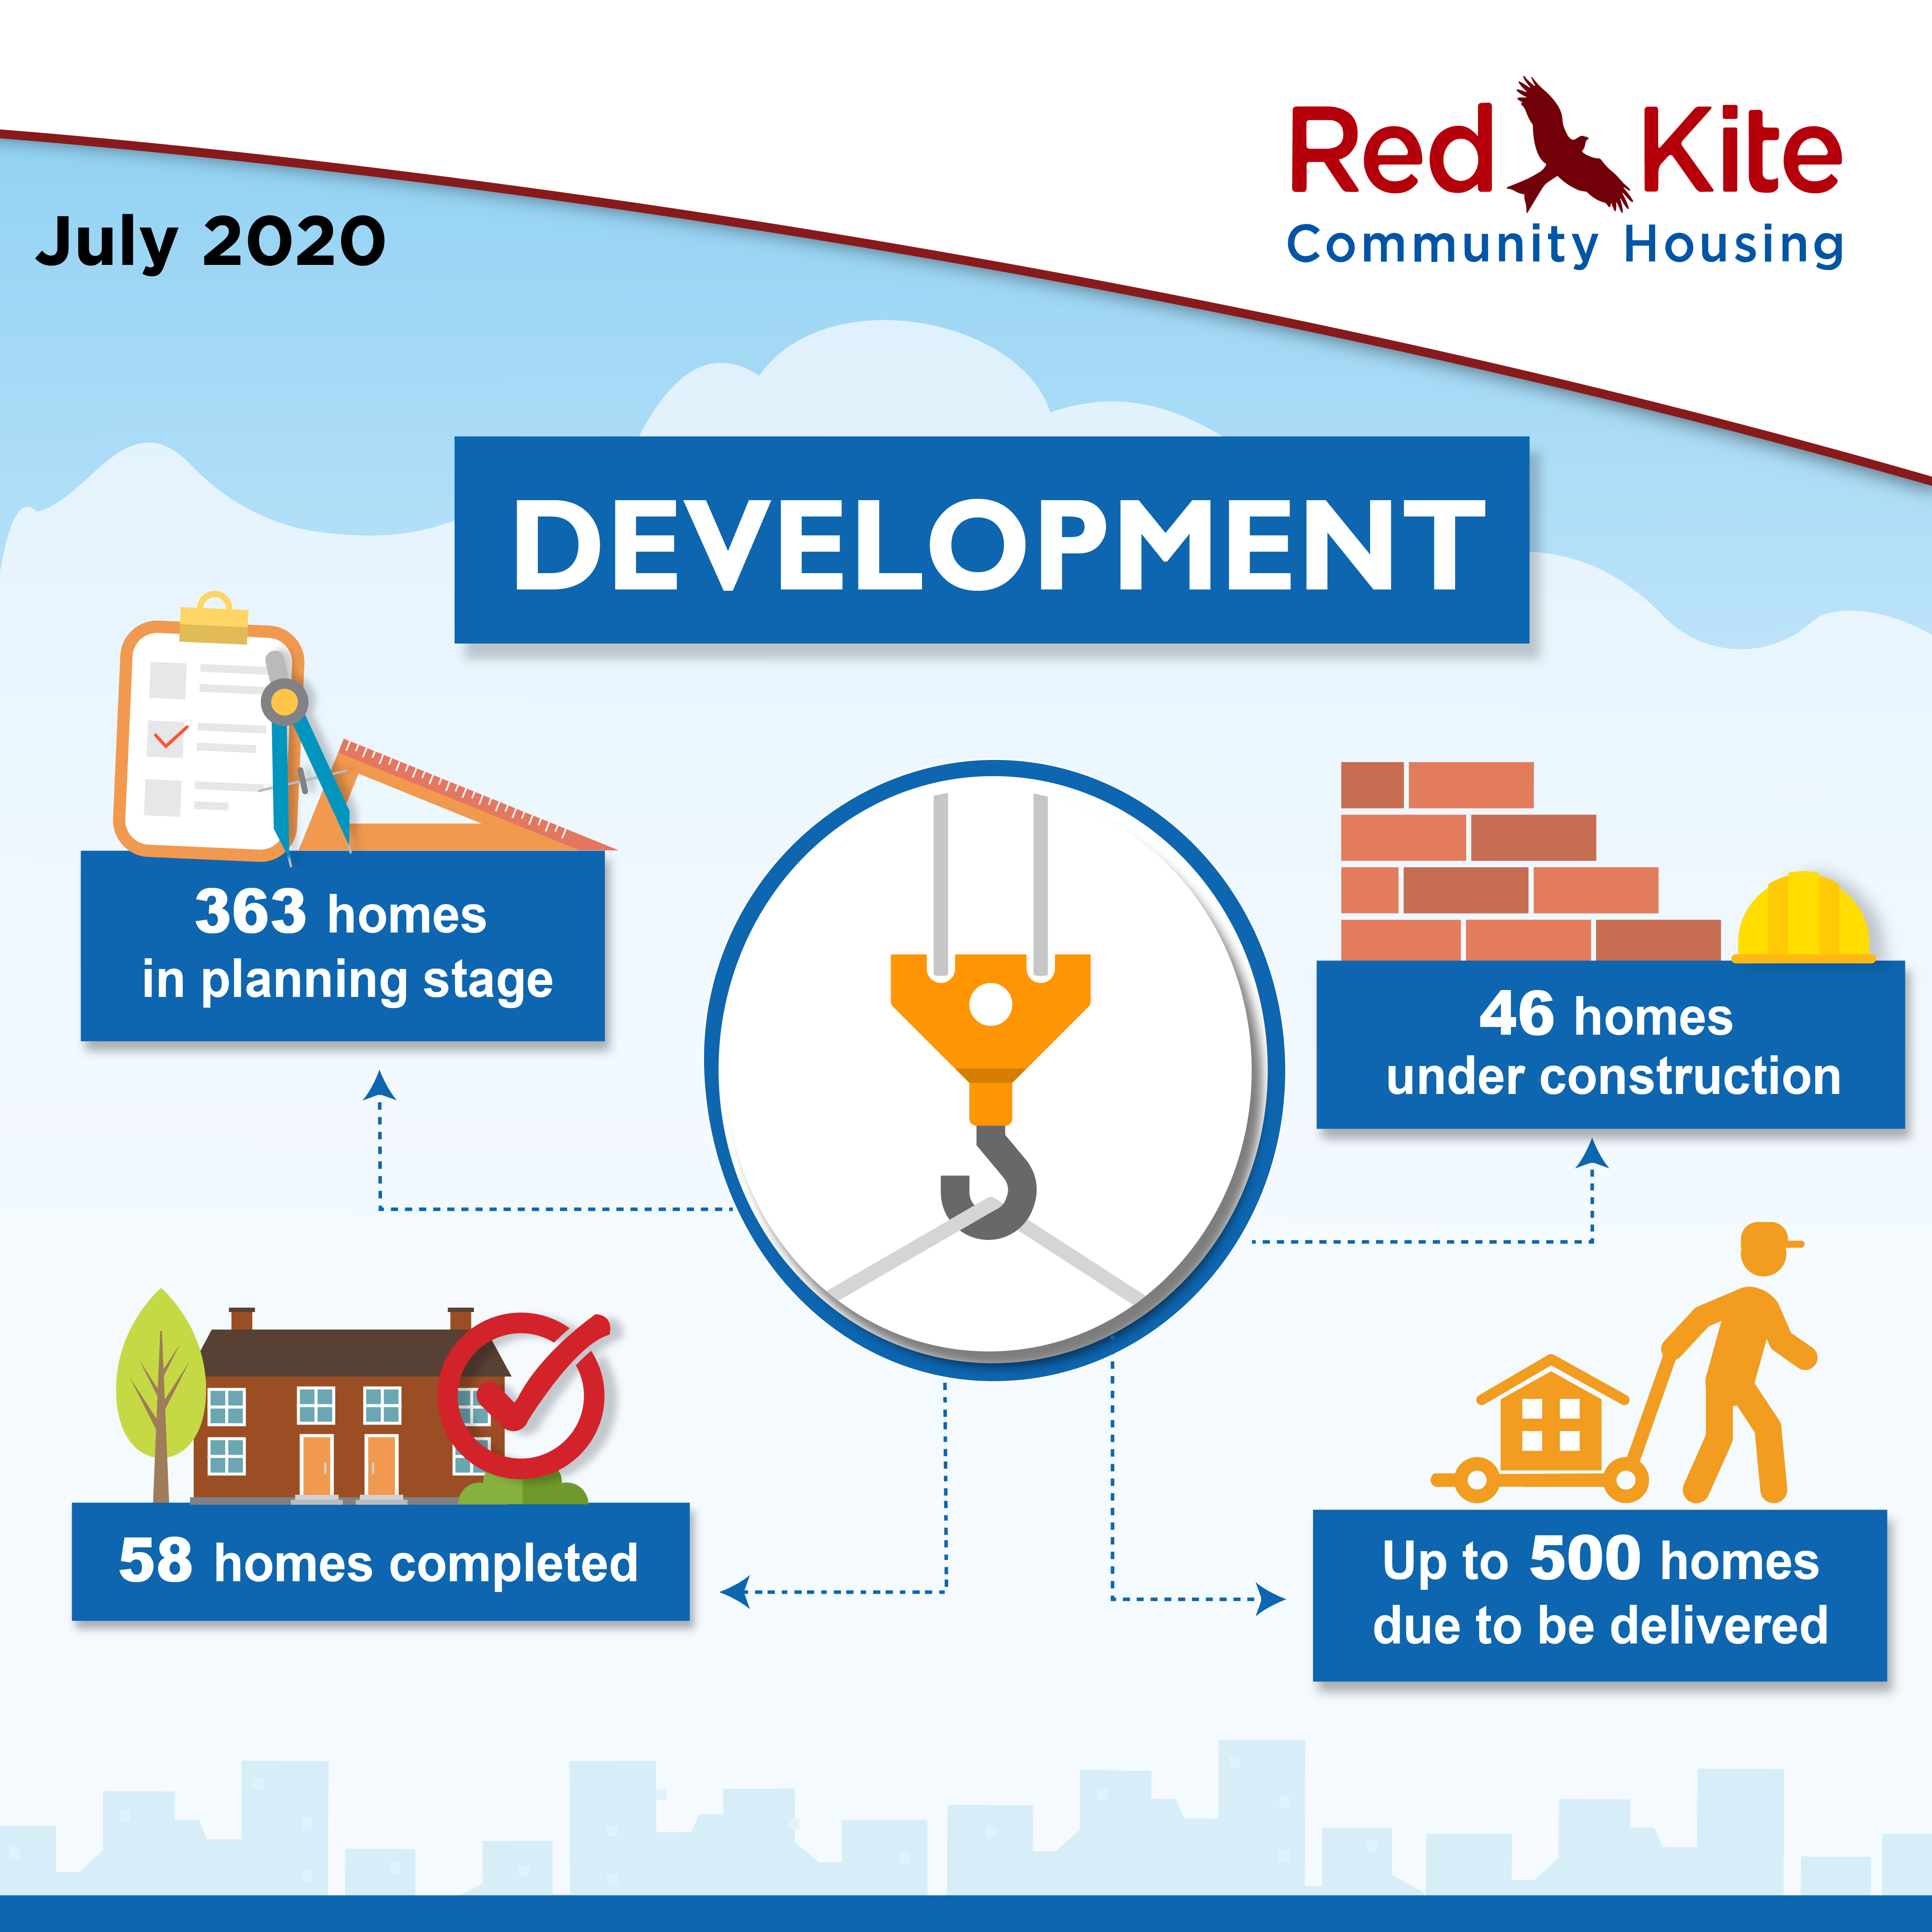 Development Performance measures, July 2020 - 363 homes in planning stage; 46 homes under construction; up to 500 homes due to be delivered; 58 homes completed